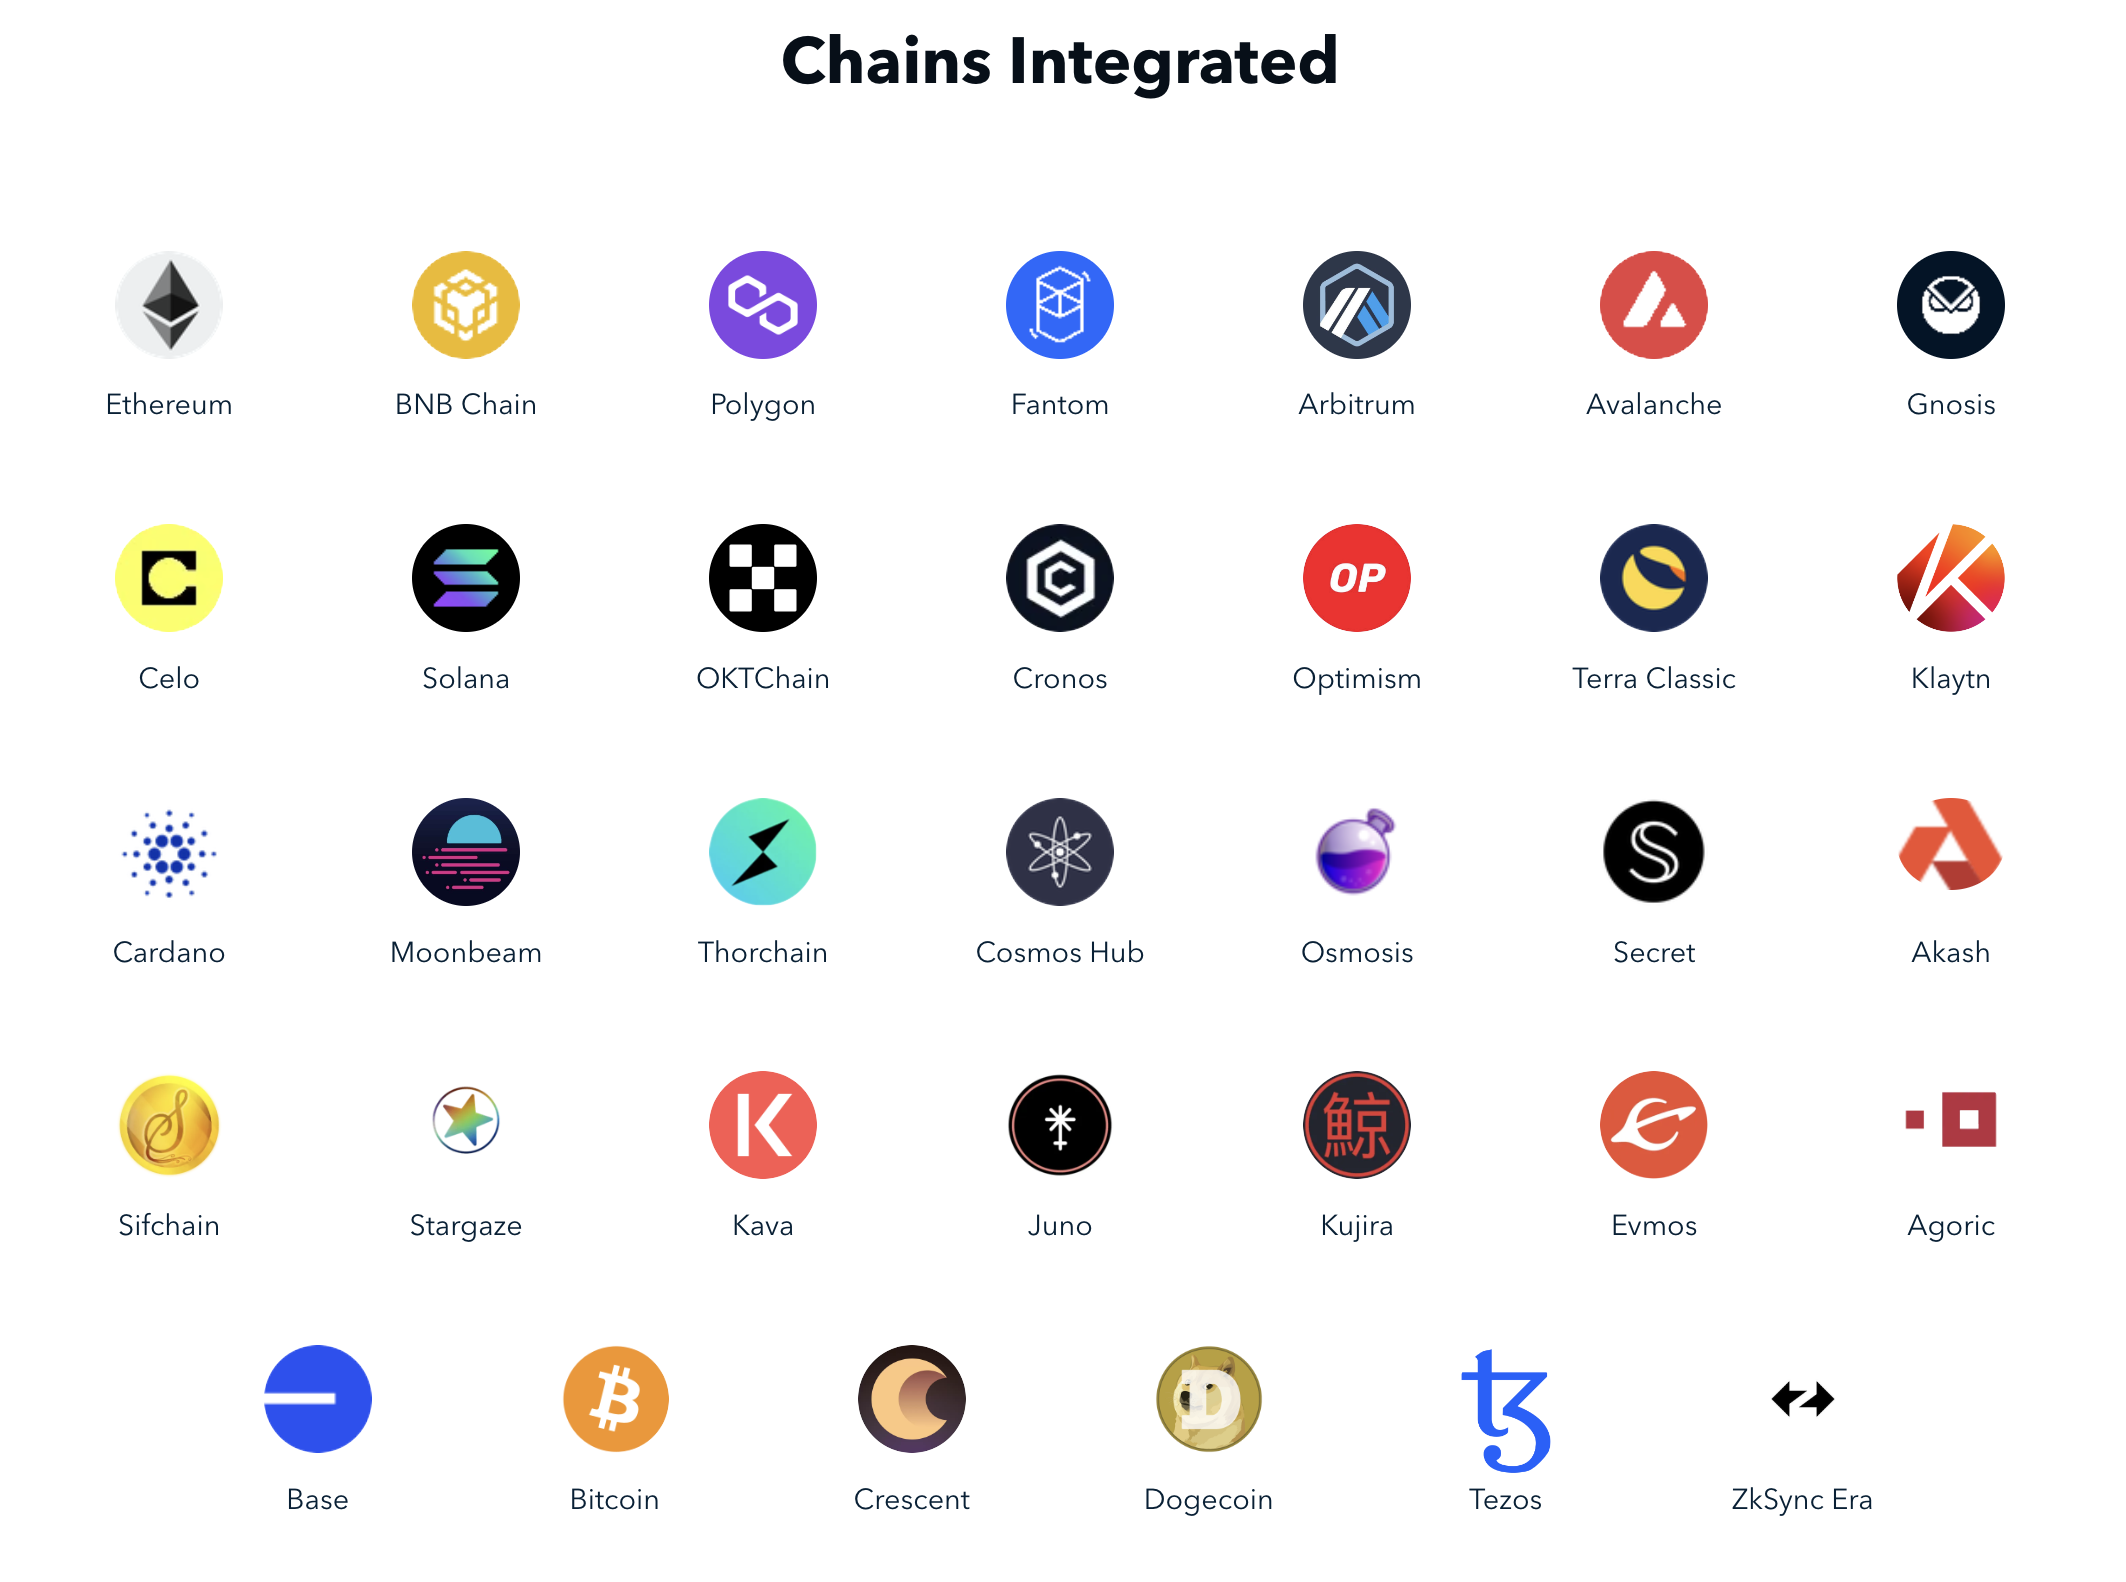 integrated chains on defi